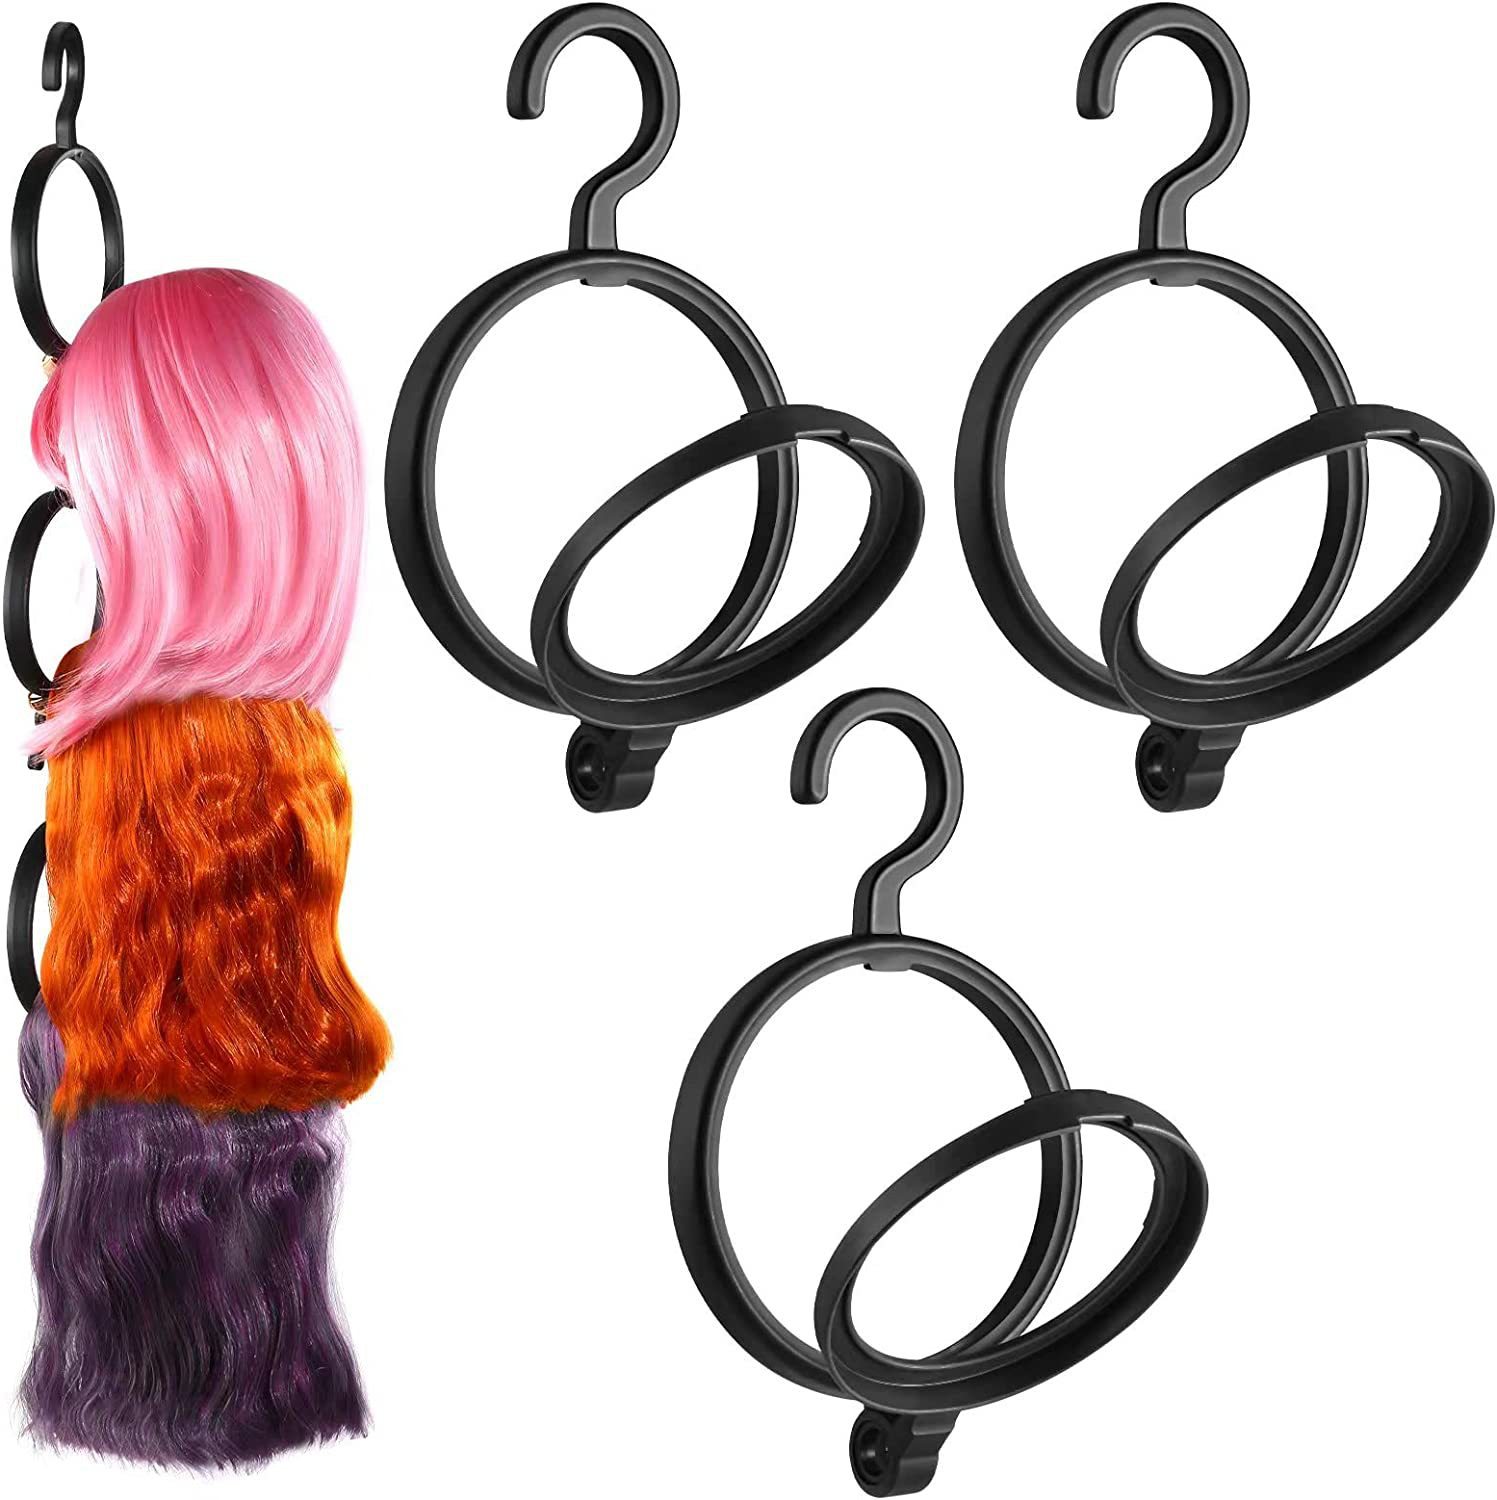 Hanging Wig Stand, Premium Wig Hanger for Multiple Wigs for